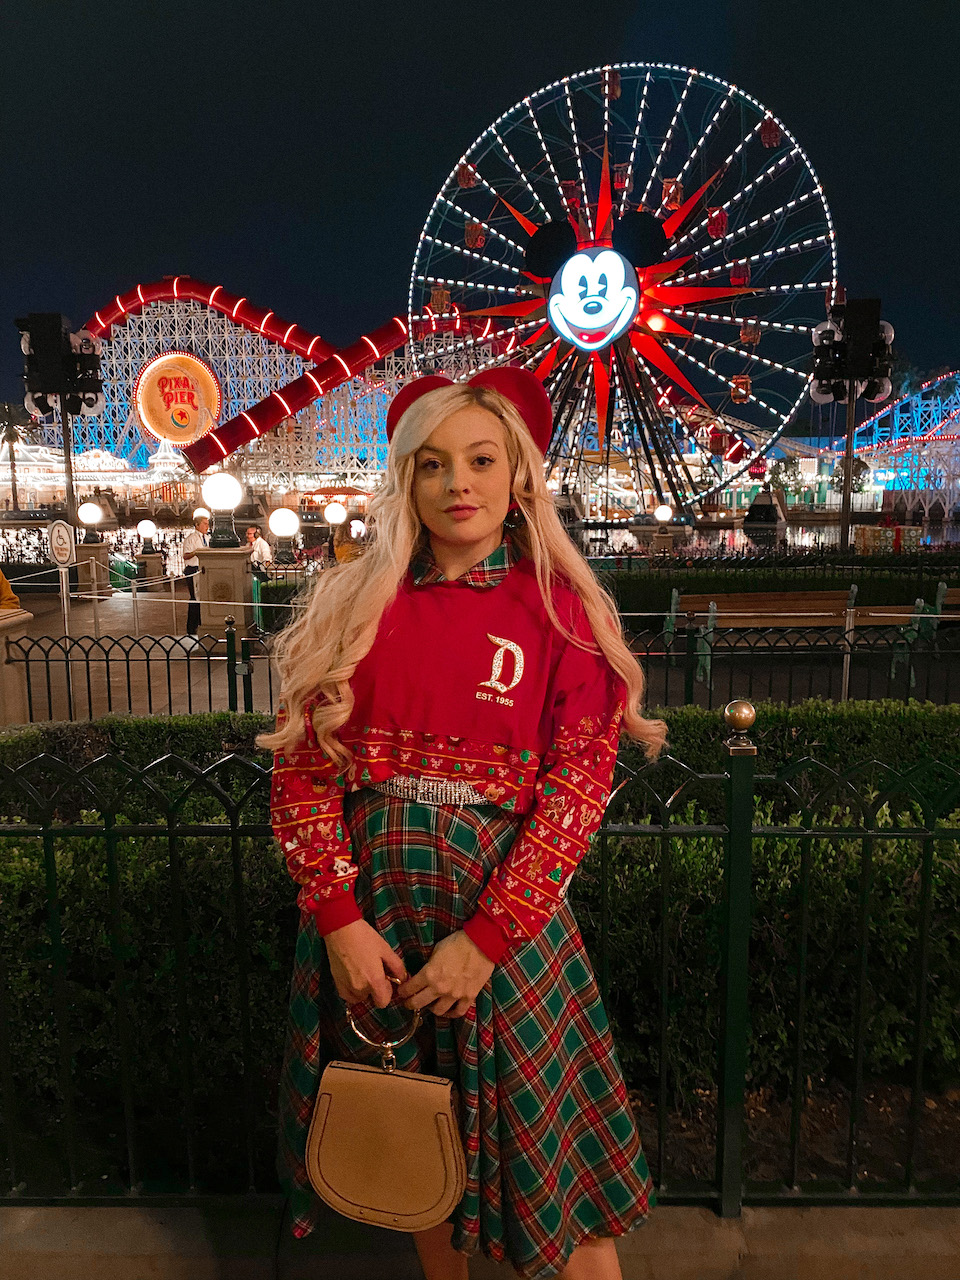 Disney Outfit Ideas for Your Next Trip To Disney World or Disney